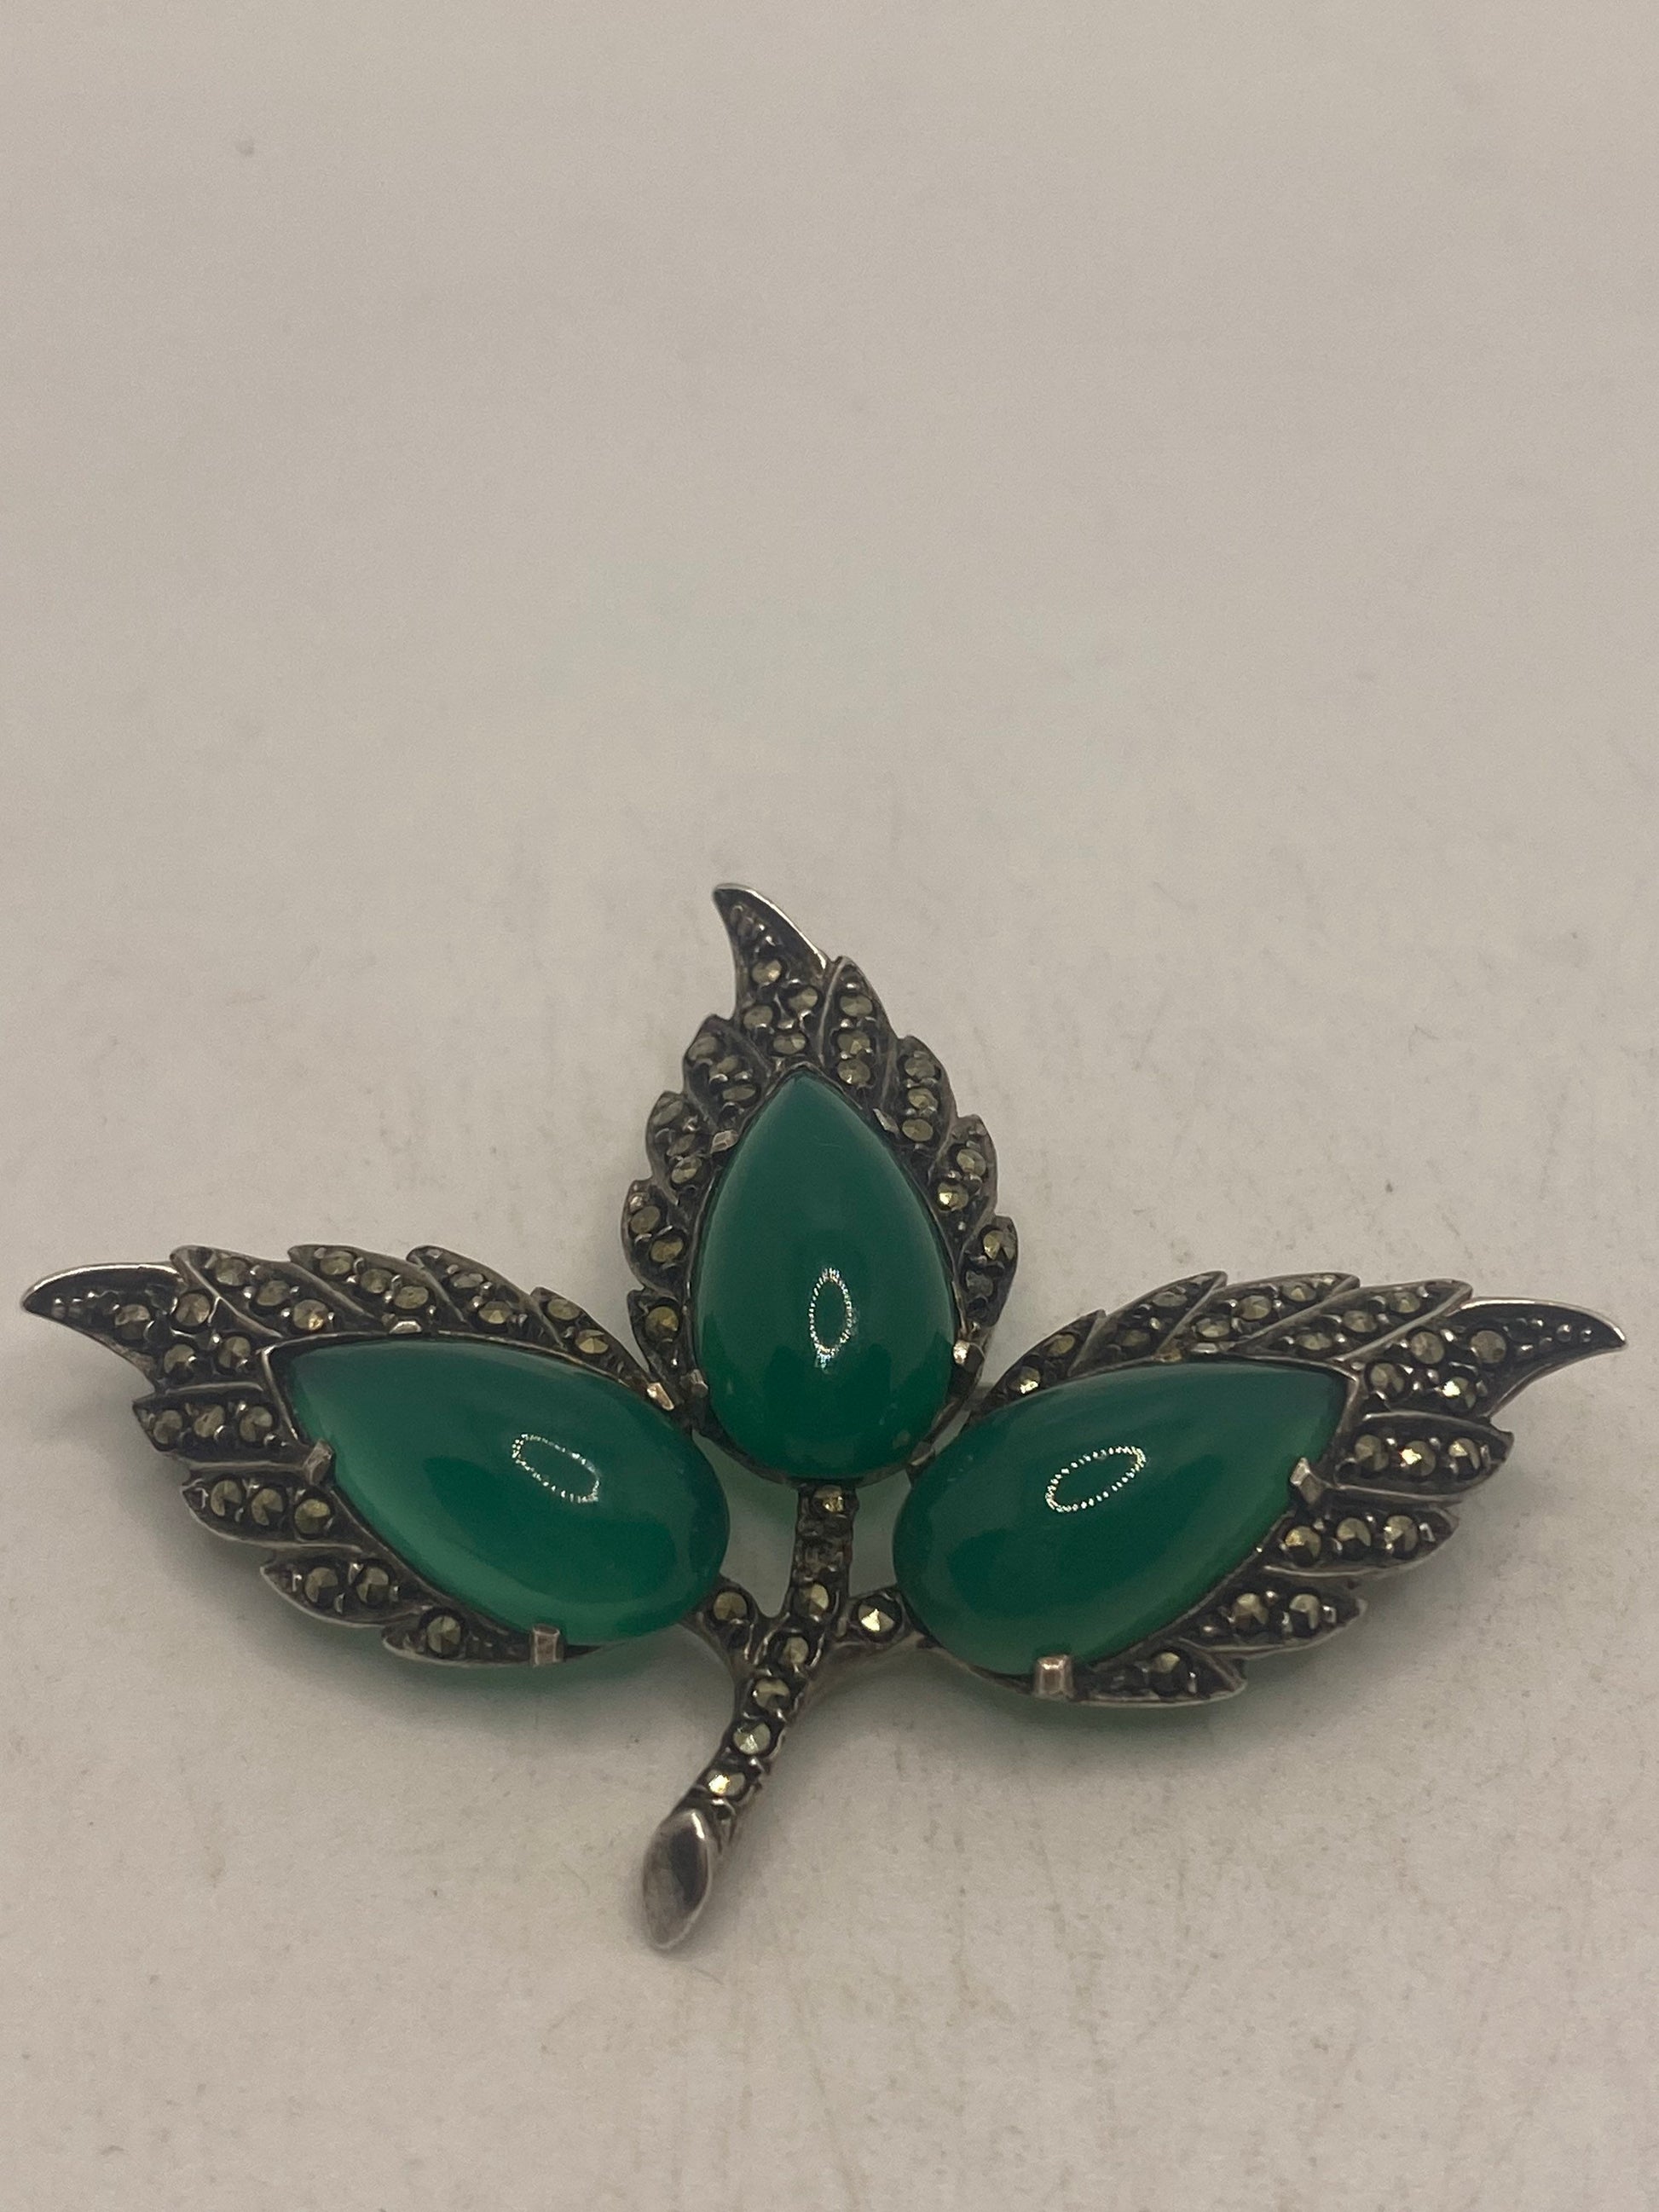 Vintage Green Onyx Pin Marcasite 925 Sterling Silver Brooch